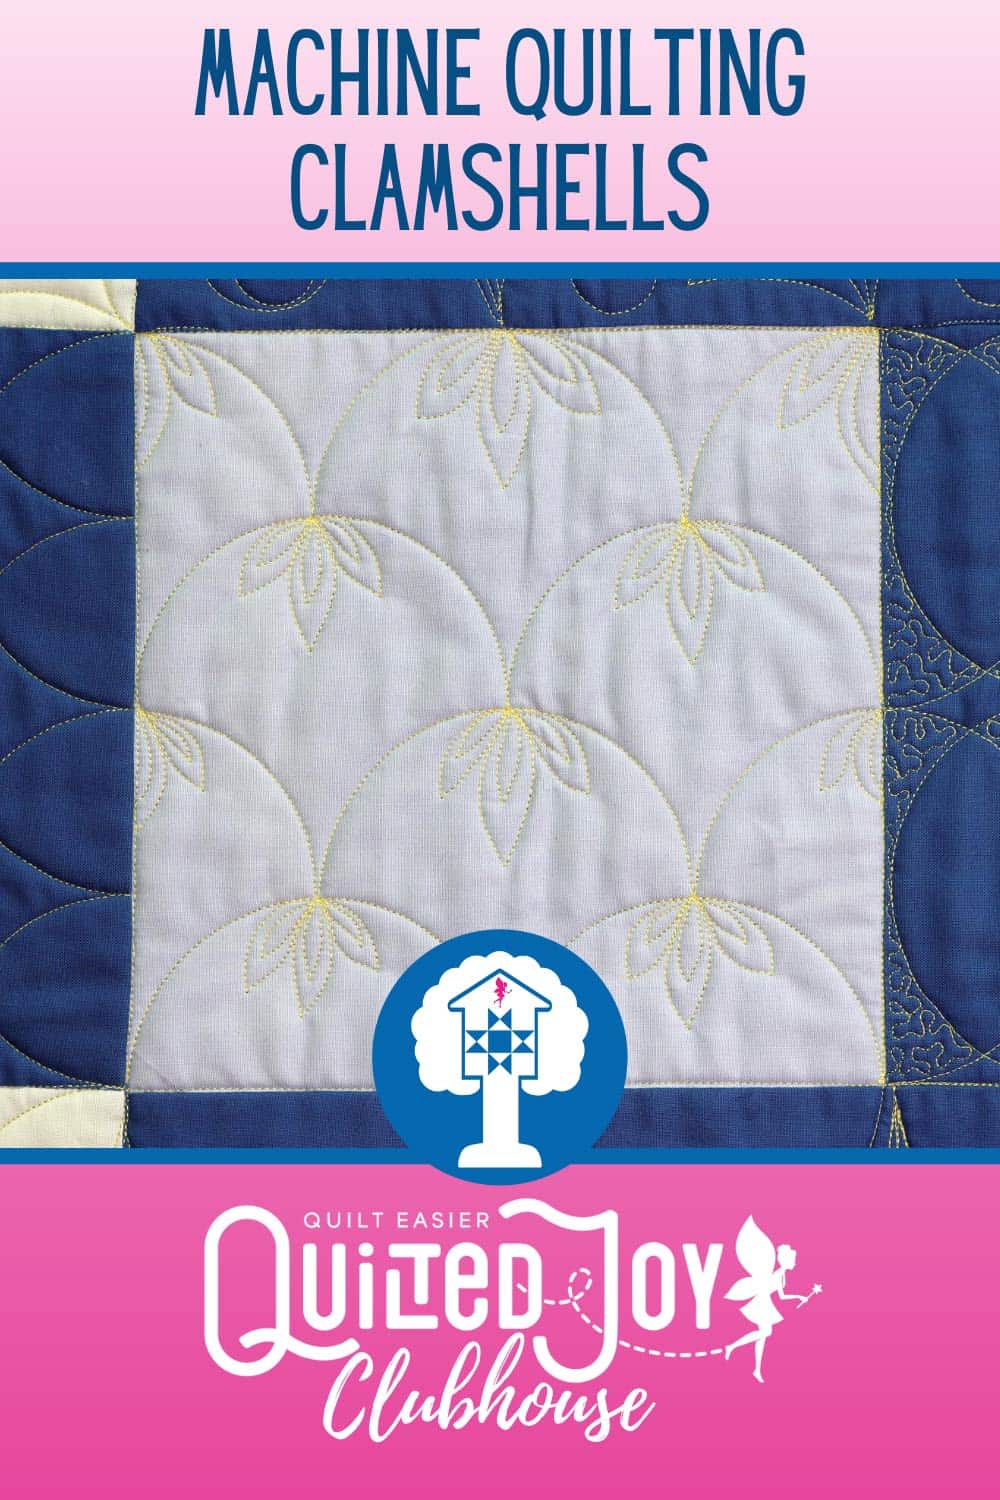 image of clamshell machine quilting with text "Quilted Joy Clubhouse - Machine Quilting Clamshells"